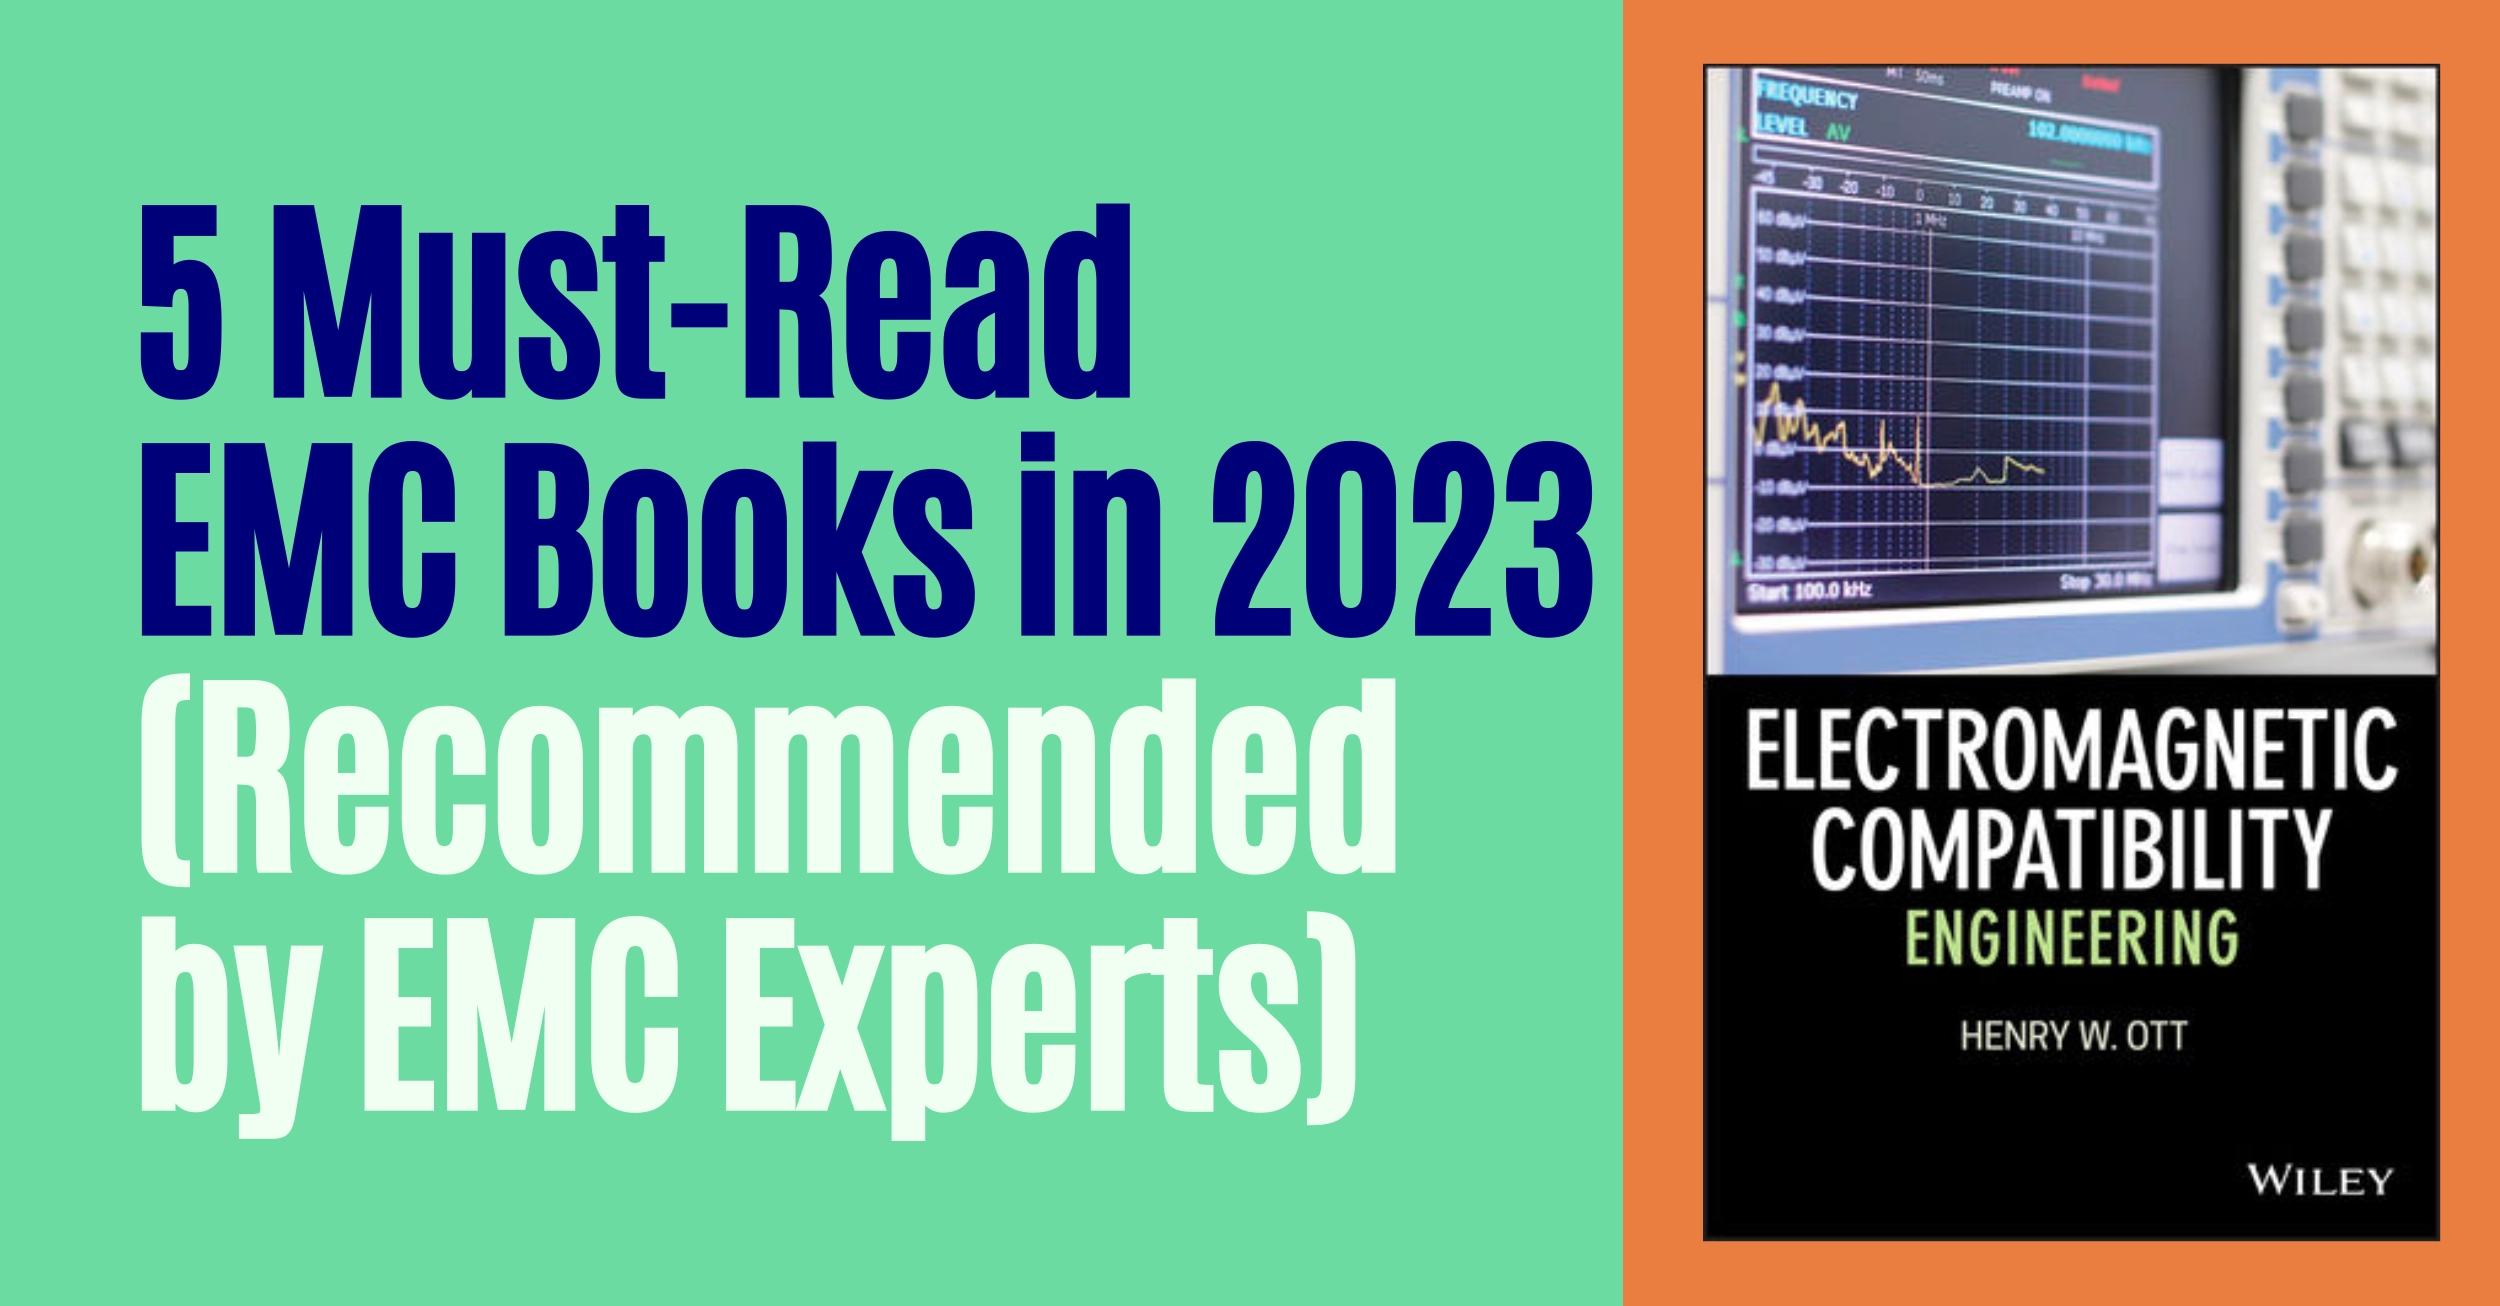 5-must-read-EMC-books-recommended-by-EMC-experts (1)